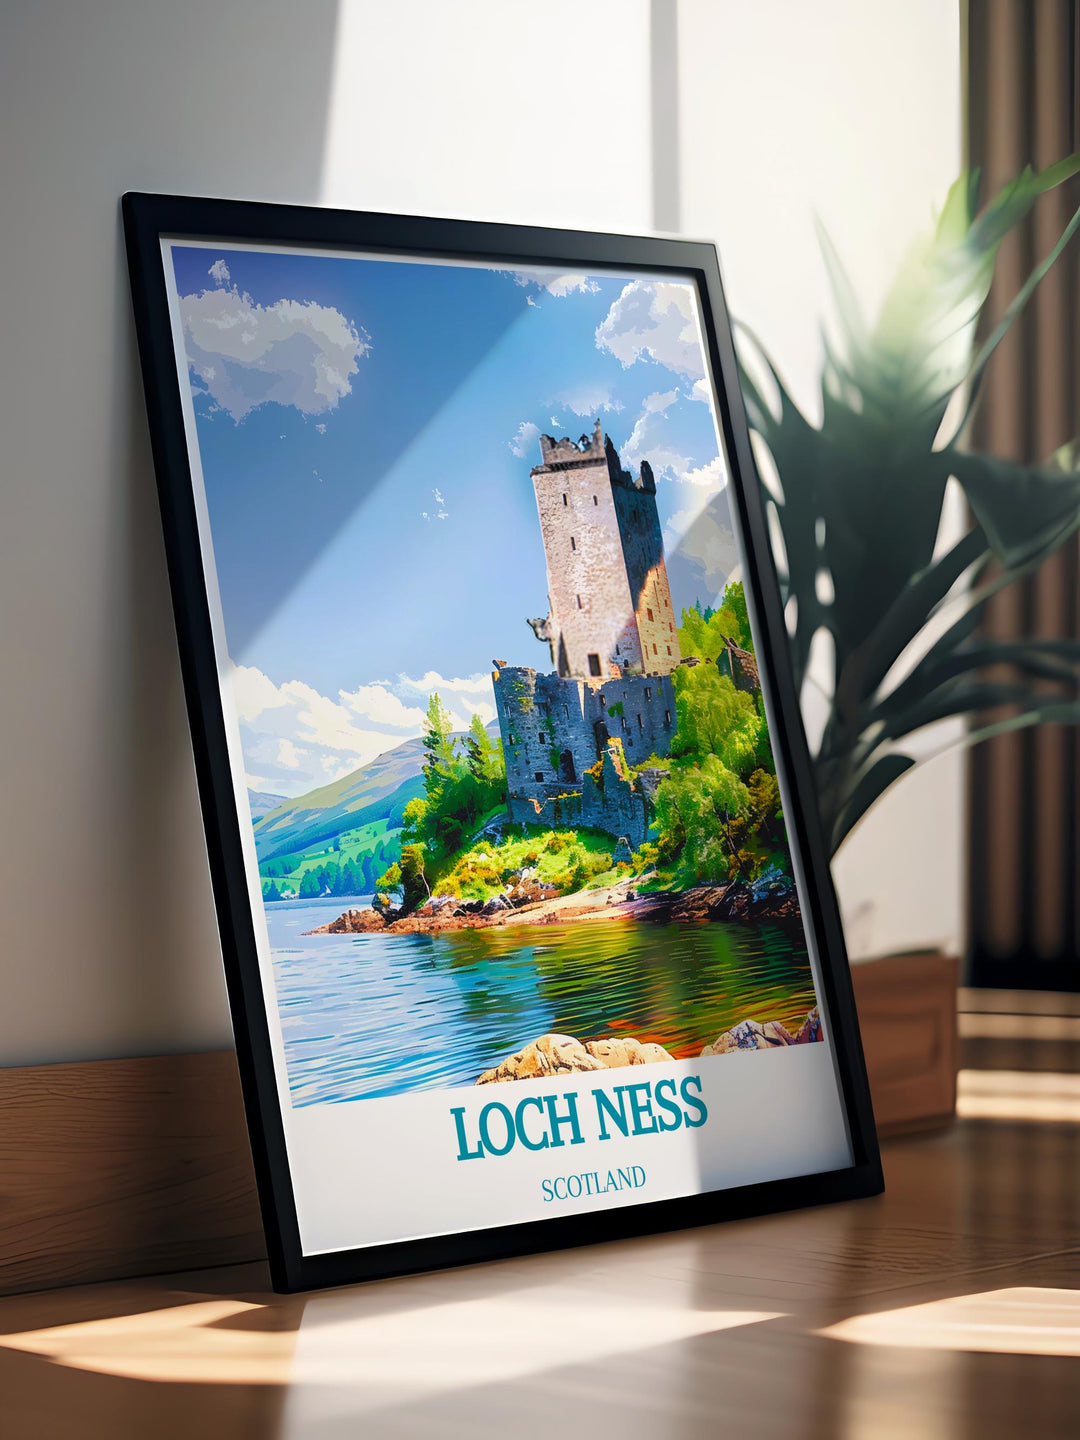 Custom print of the Scottish Highlands, allowing personalization with scenes from around Loch Ness and Urquhart Castle.